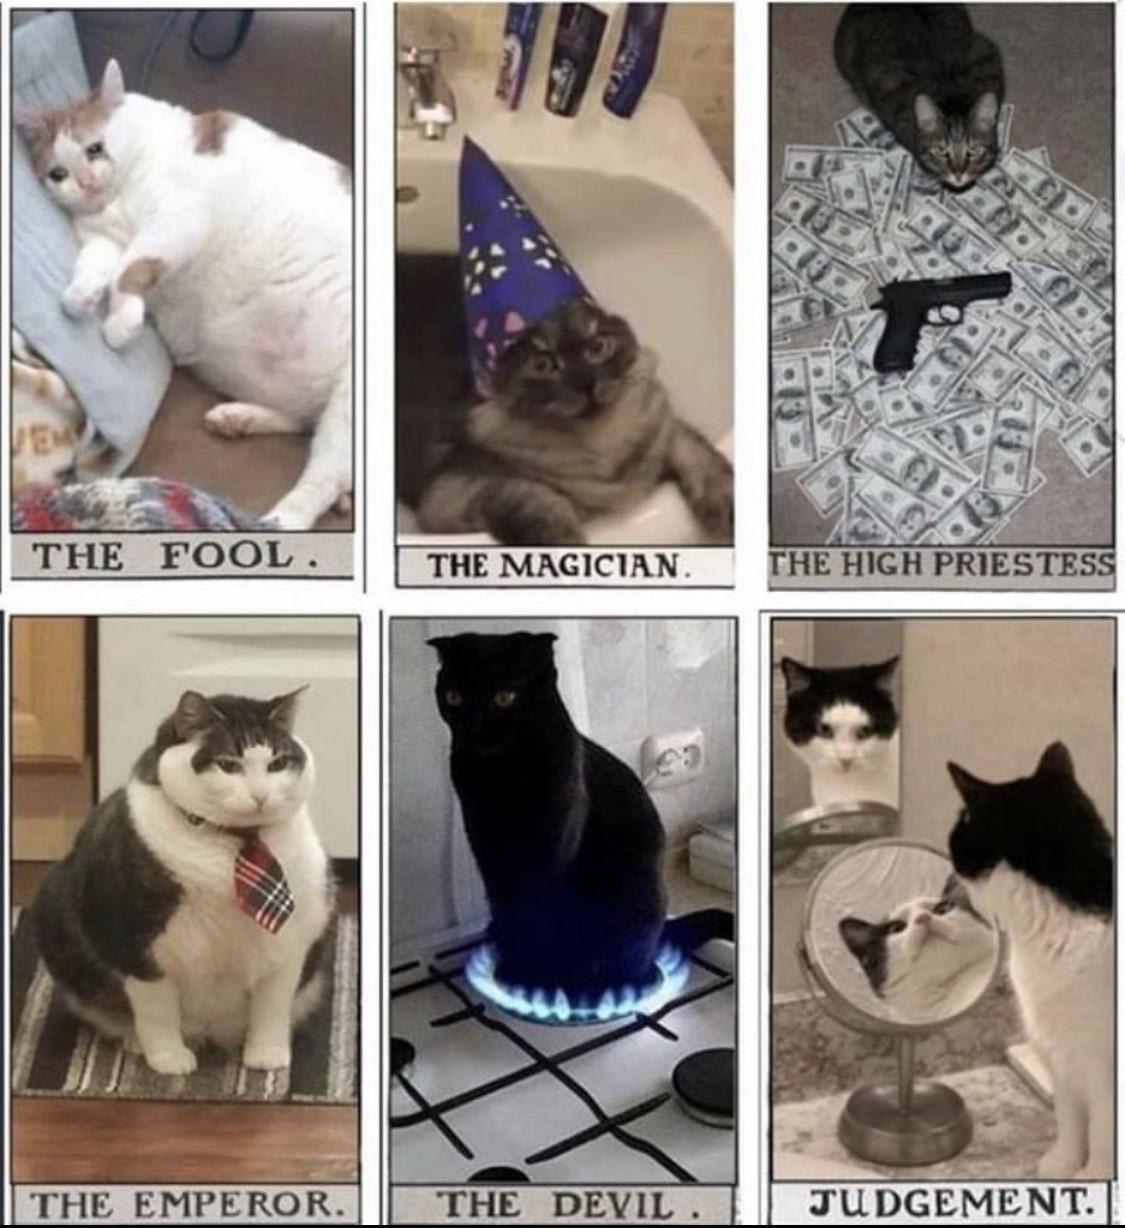 Tarot of Chonkers